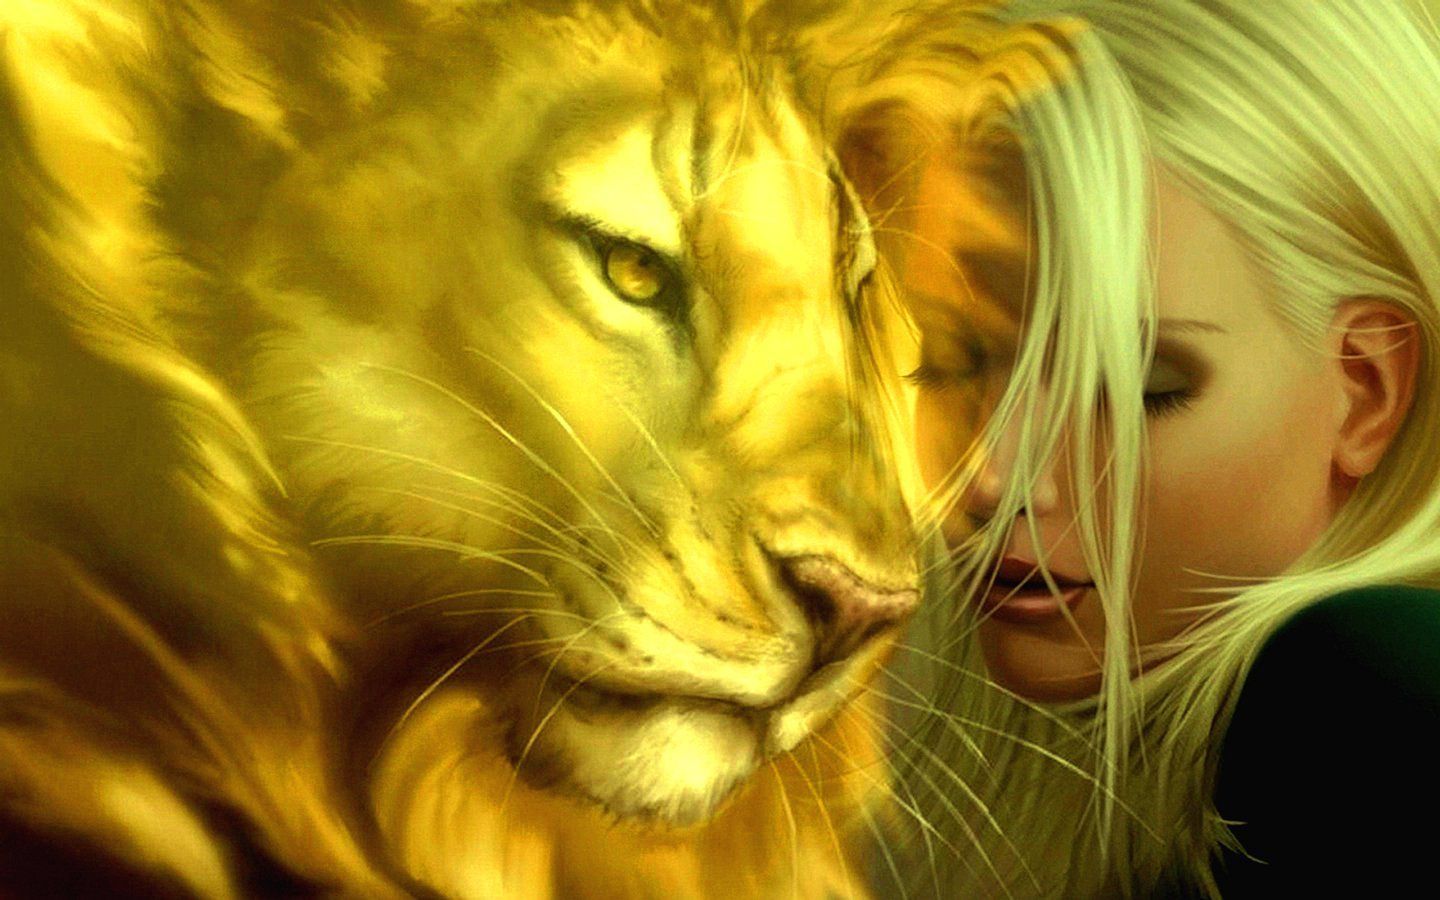 Lion and Girl Wallpaper Free Lion and Girl Background